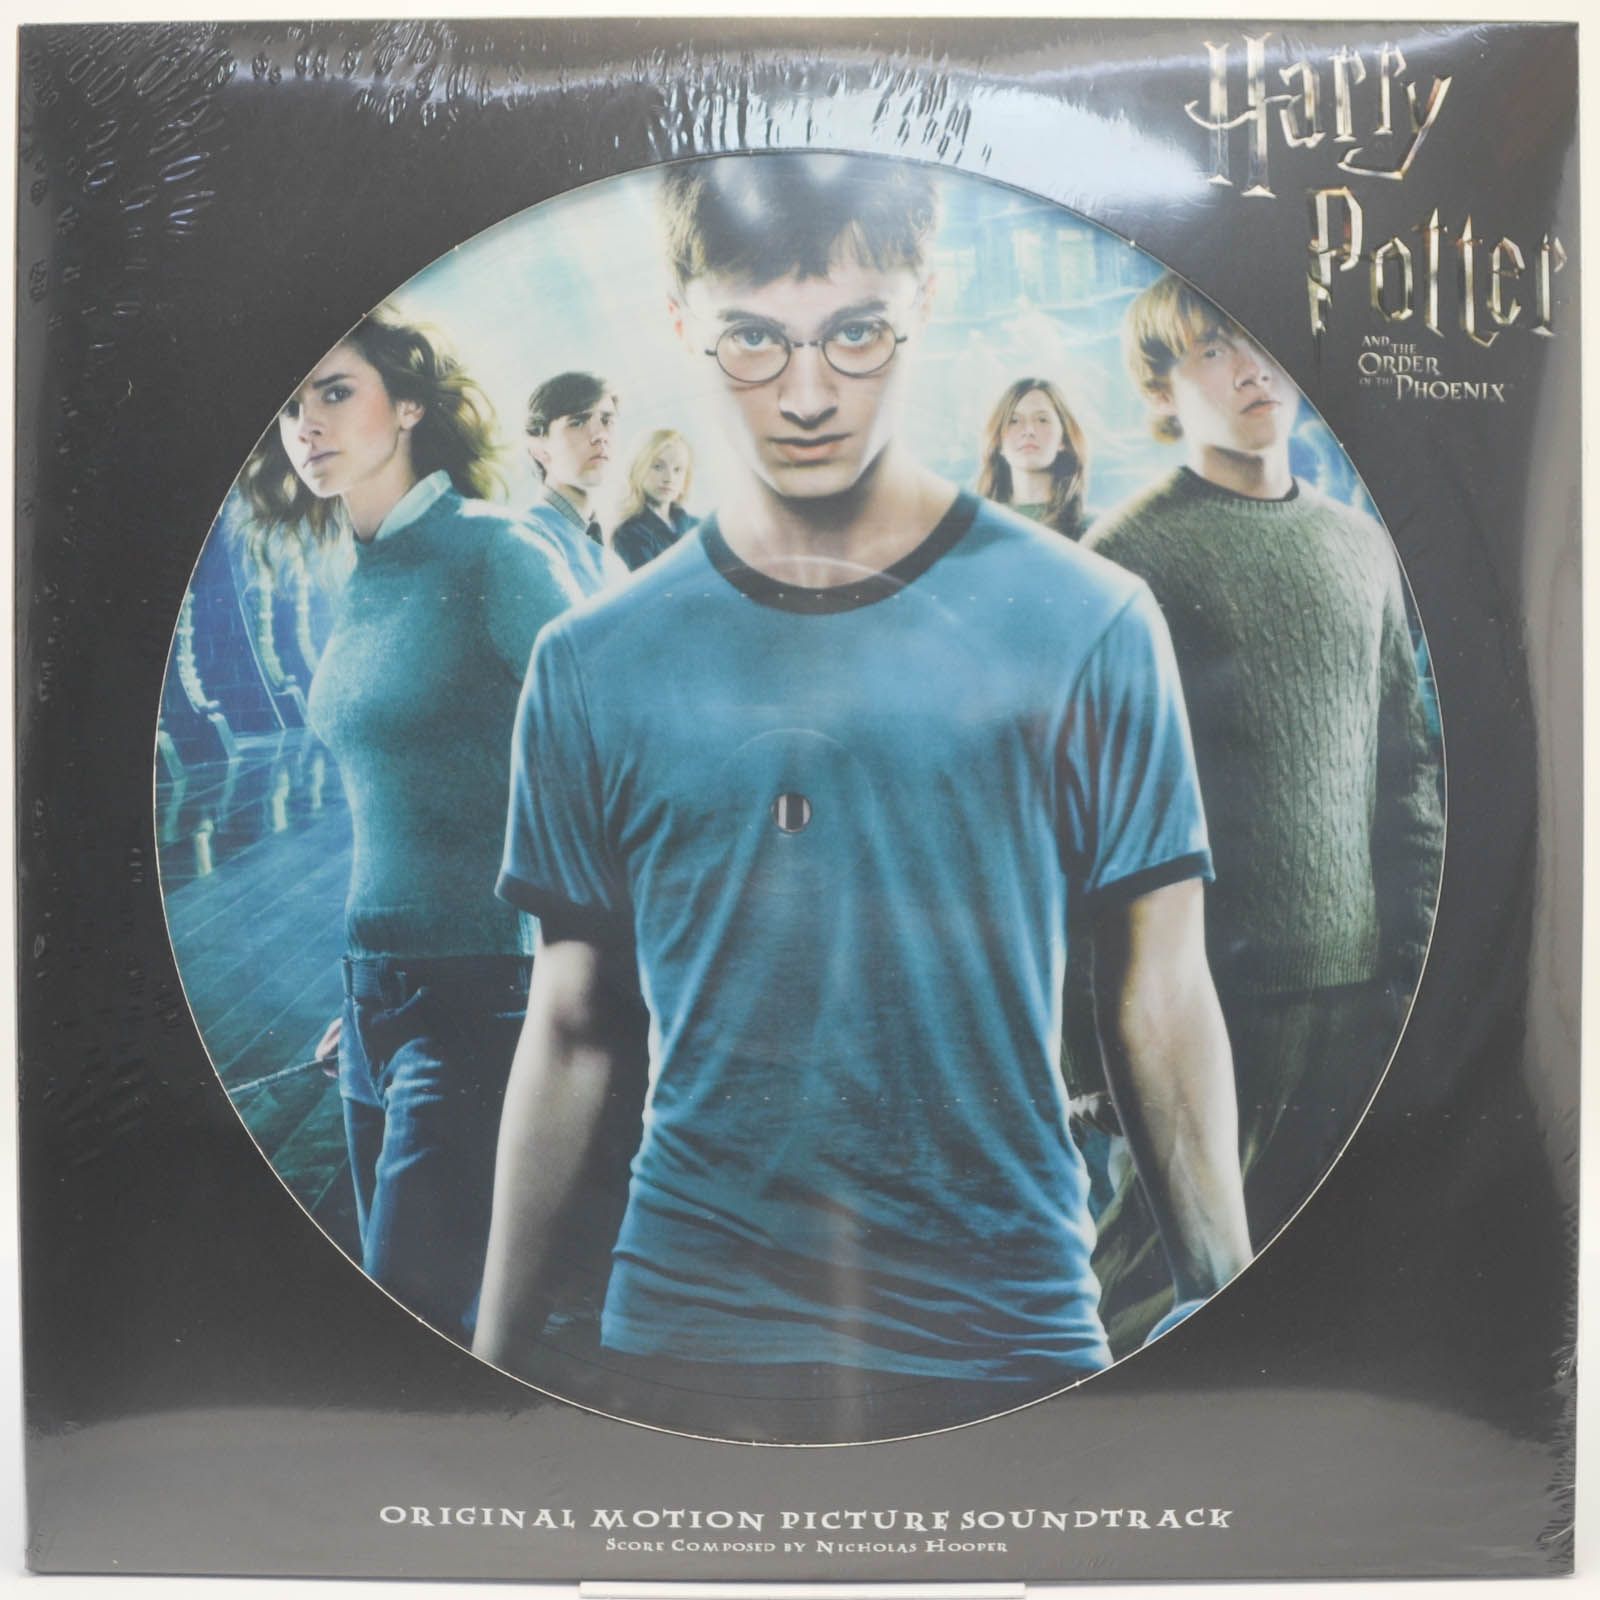 Nicholas Hooper — Harry Potter And The Order Of The Phoenix (Original Motion Picture Soundtrack) (2LP), 2007